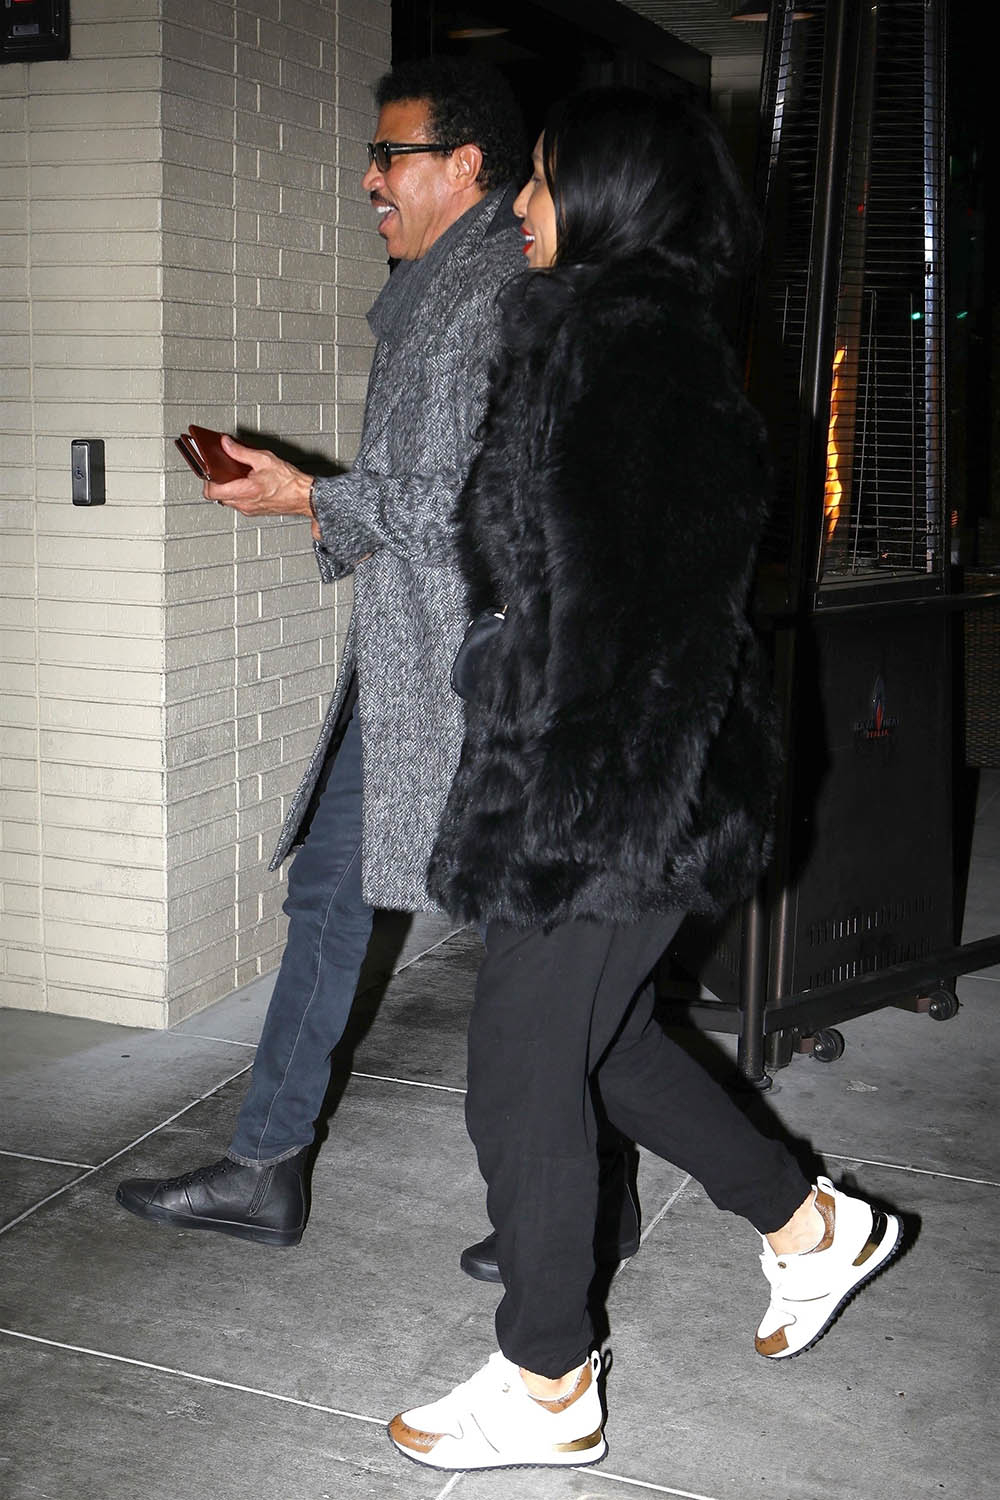 Lionel Richie and his girlfriend in Beverly Hills